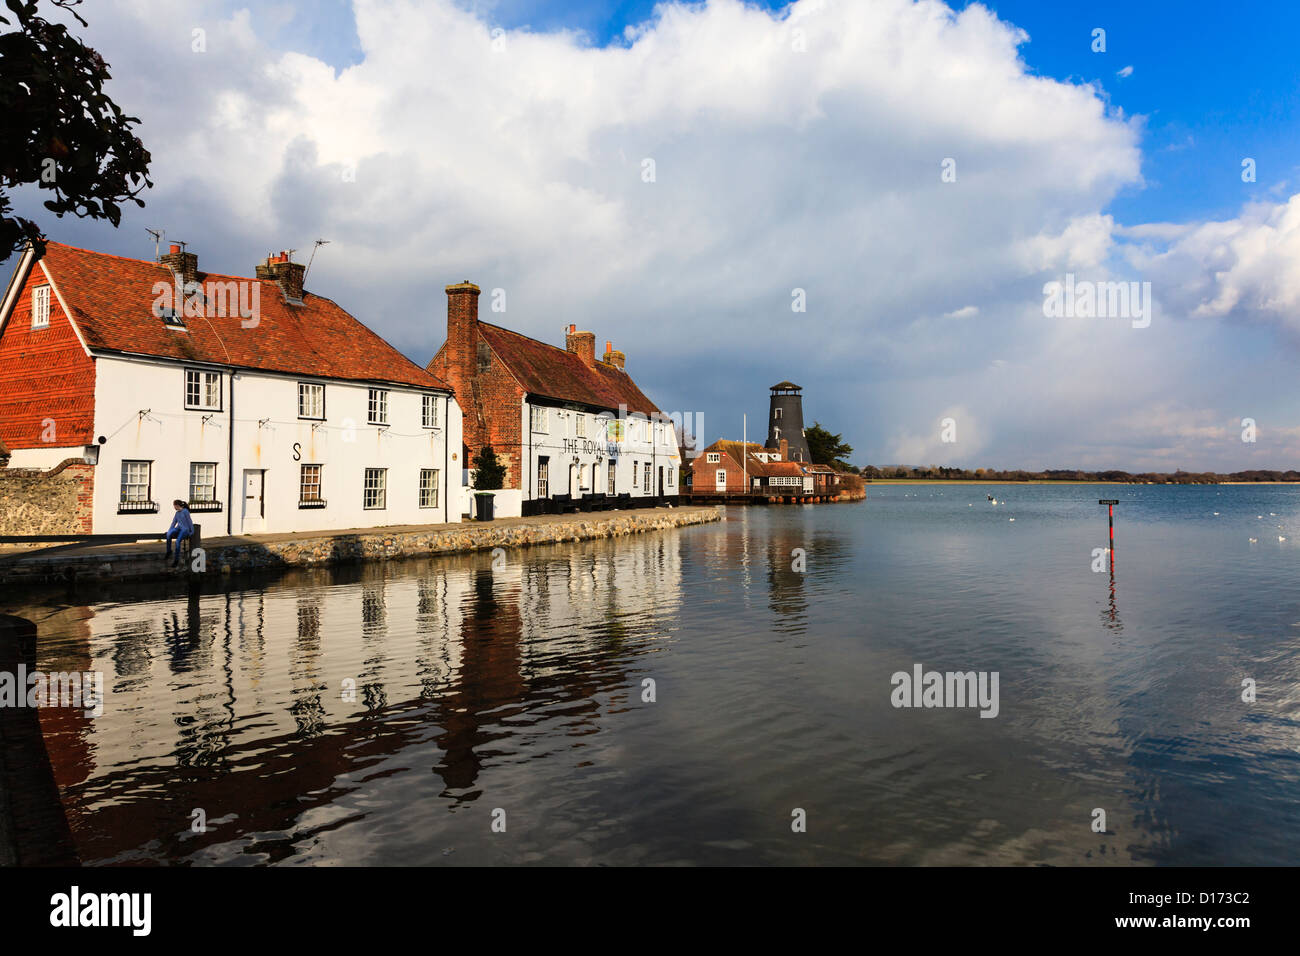 A young girl sits on a gate and swings at High Tide, Langstone, with the Royal Oak Pub and reflections in the water, Hampshire Stock Photo